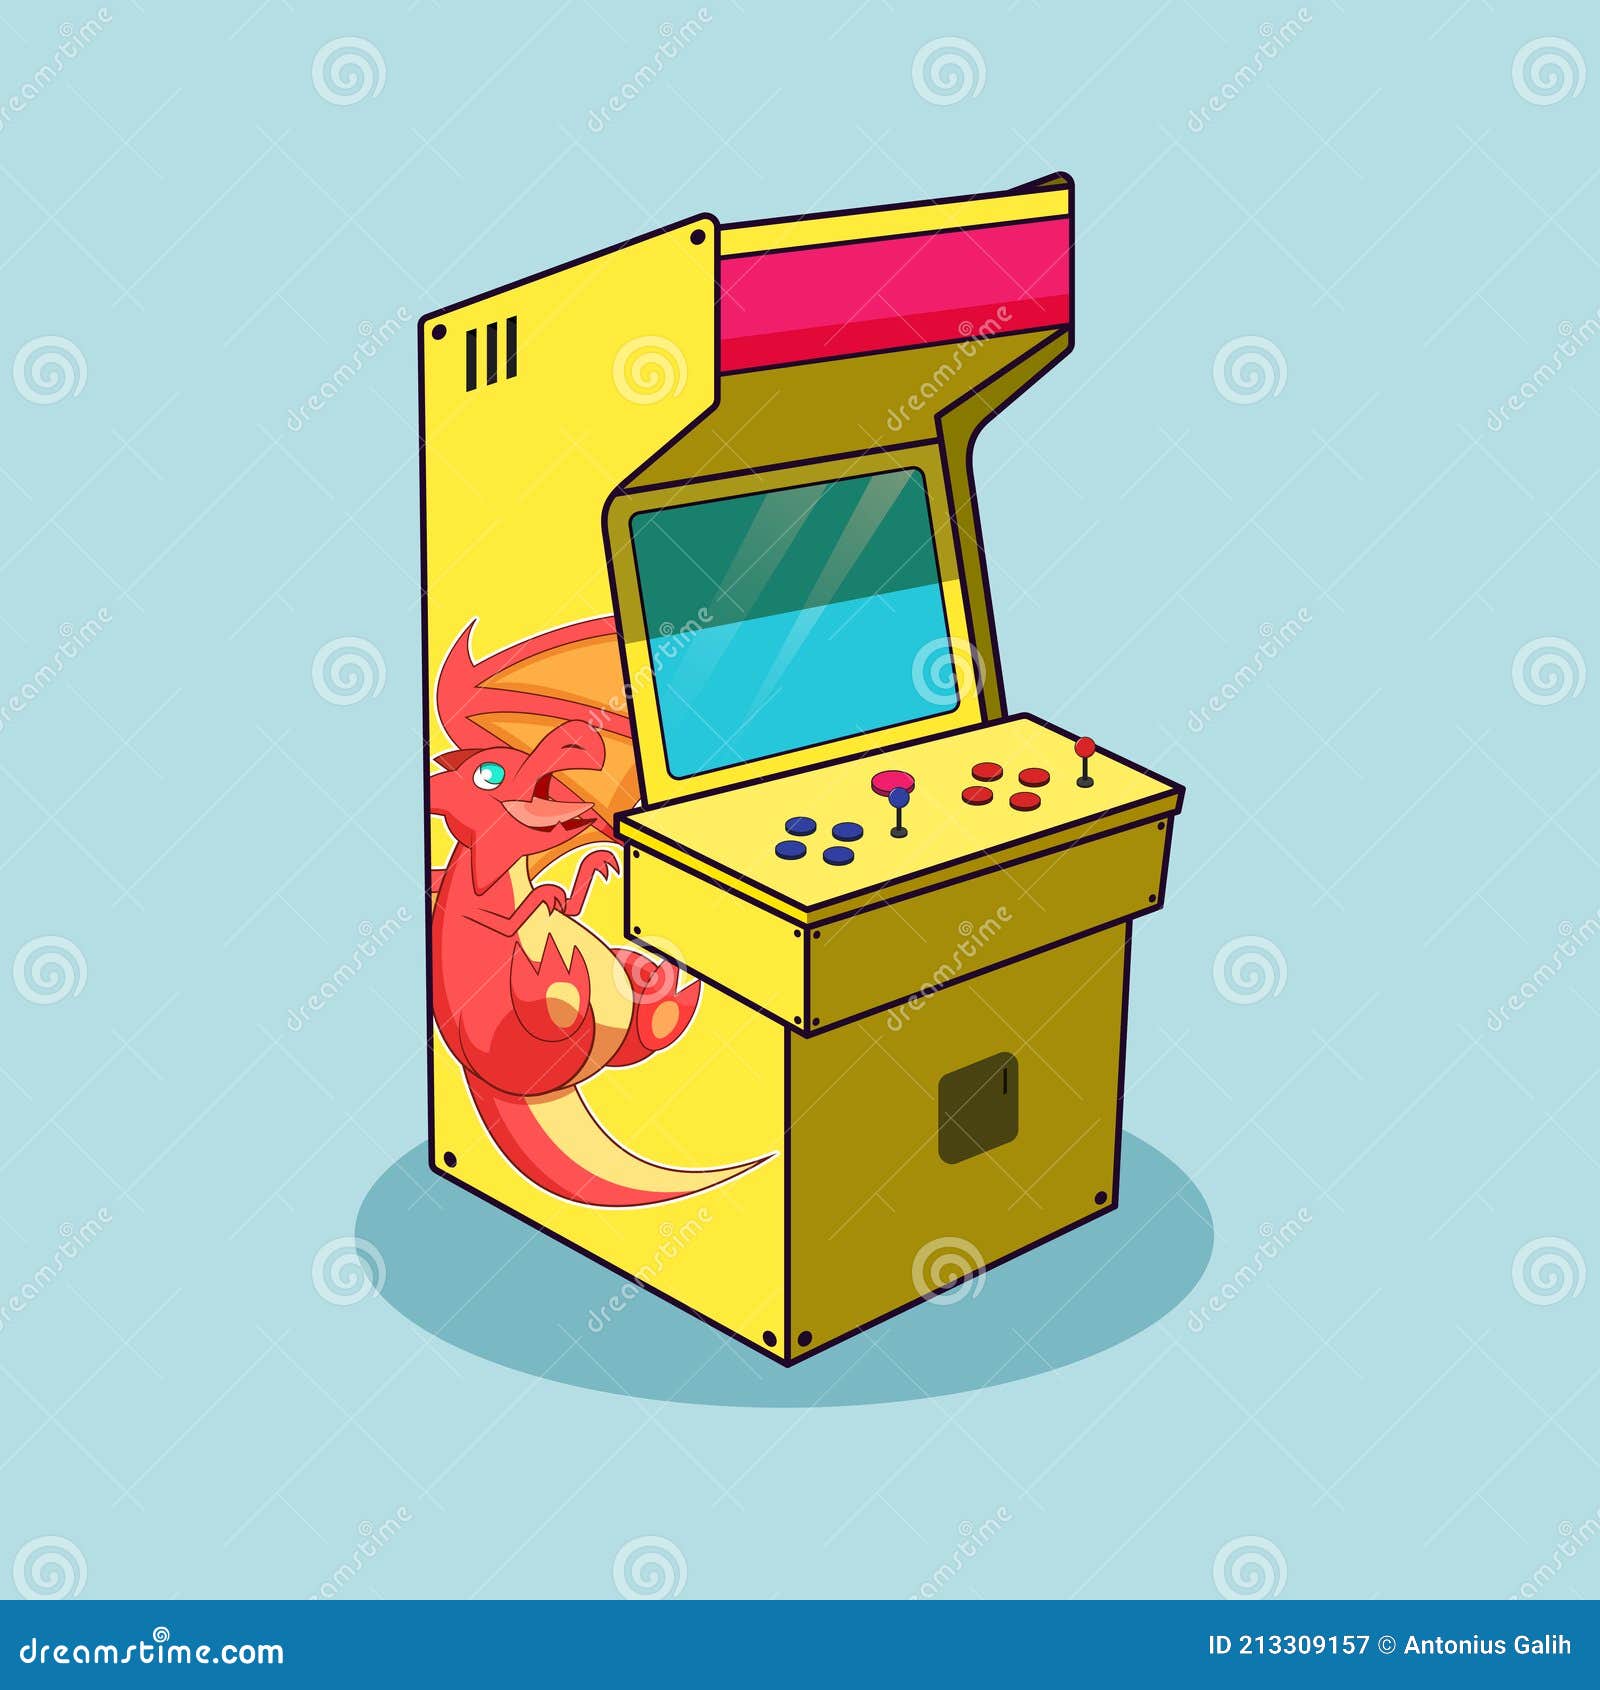 Arcade Machine Cartoon Game with Dragon Illustration on it Stock Vector -  Illustration of button, graphic: 213309157